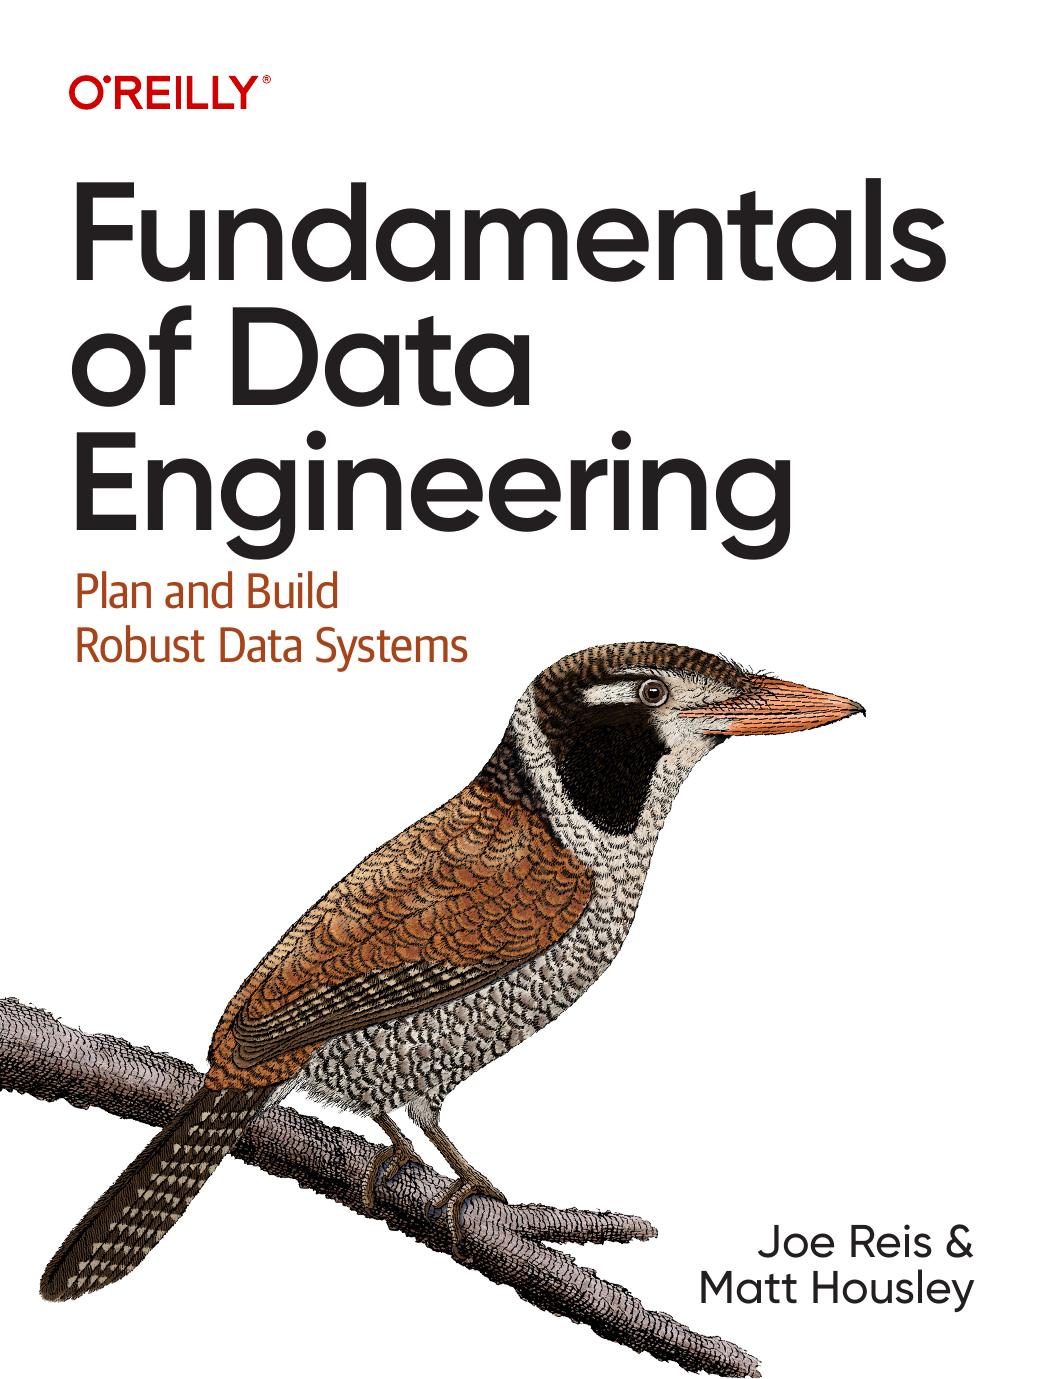 Fundamentals of Data Engineering: Plan and Build Robust Data Systems by Joe Reis & Matt Housley